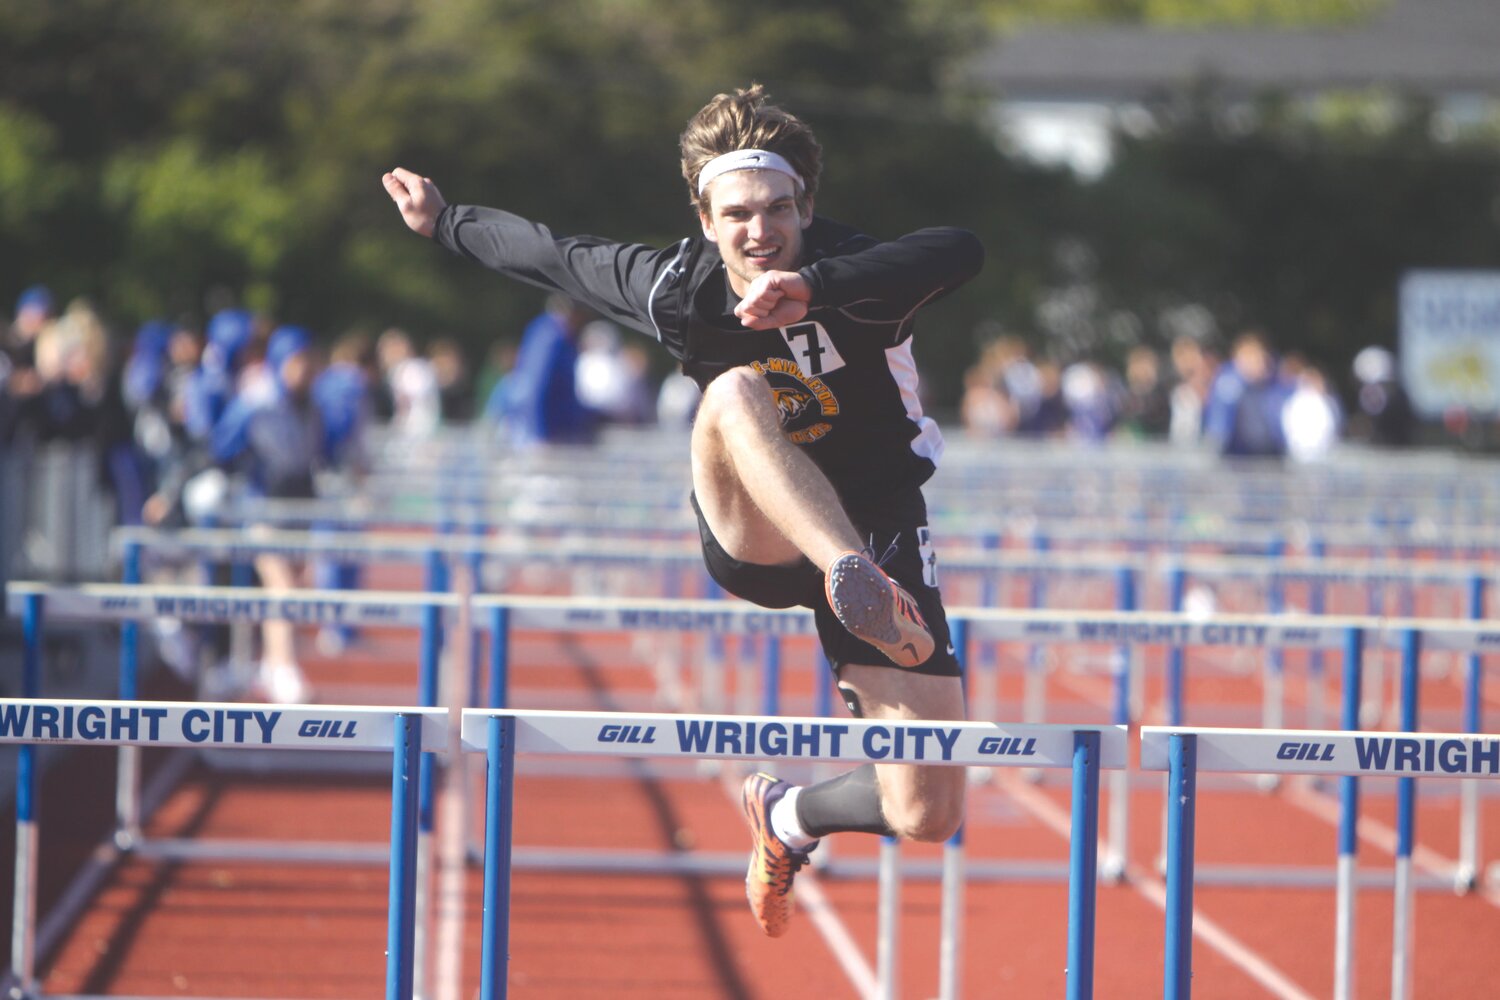 Wellsville-Middletown senior Jacob Mandrell made his third straight state track meet appearance, competing in the 110-meter hurdles.